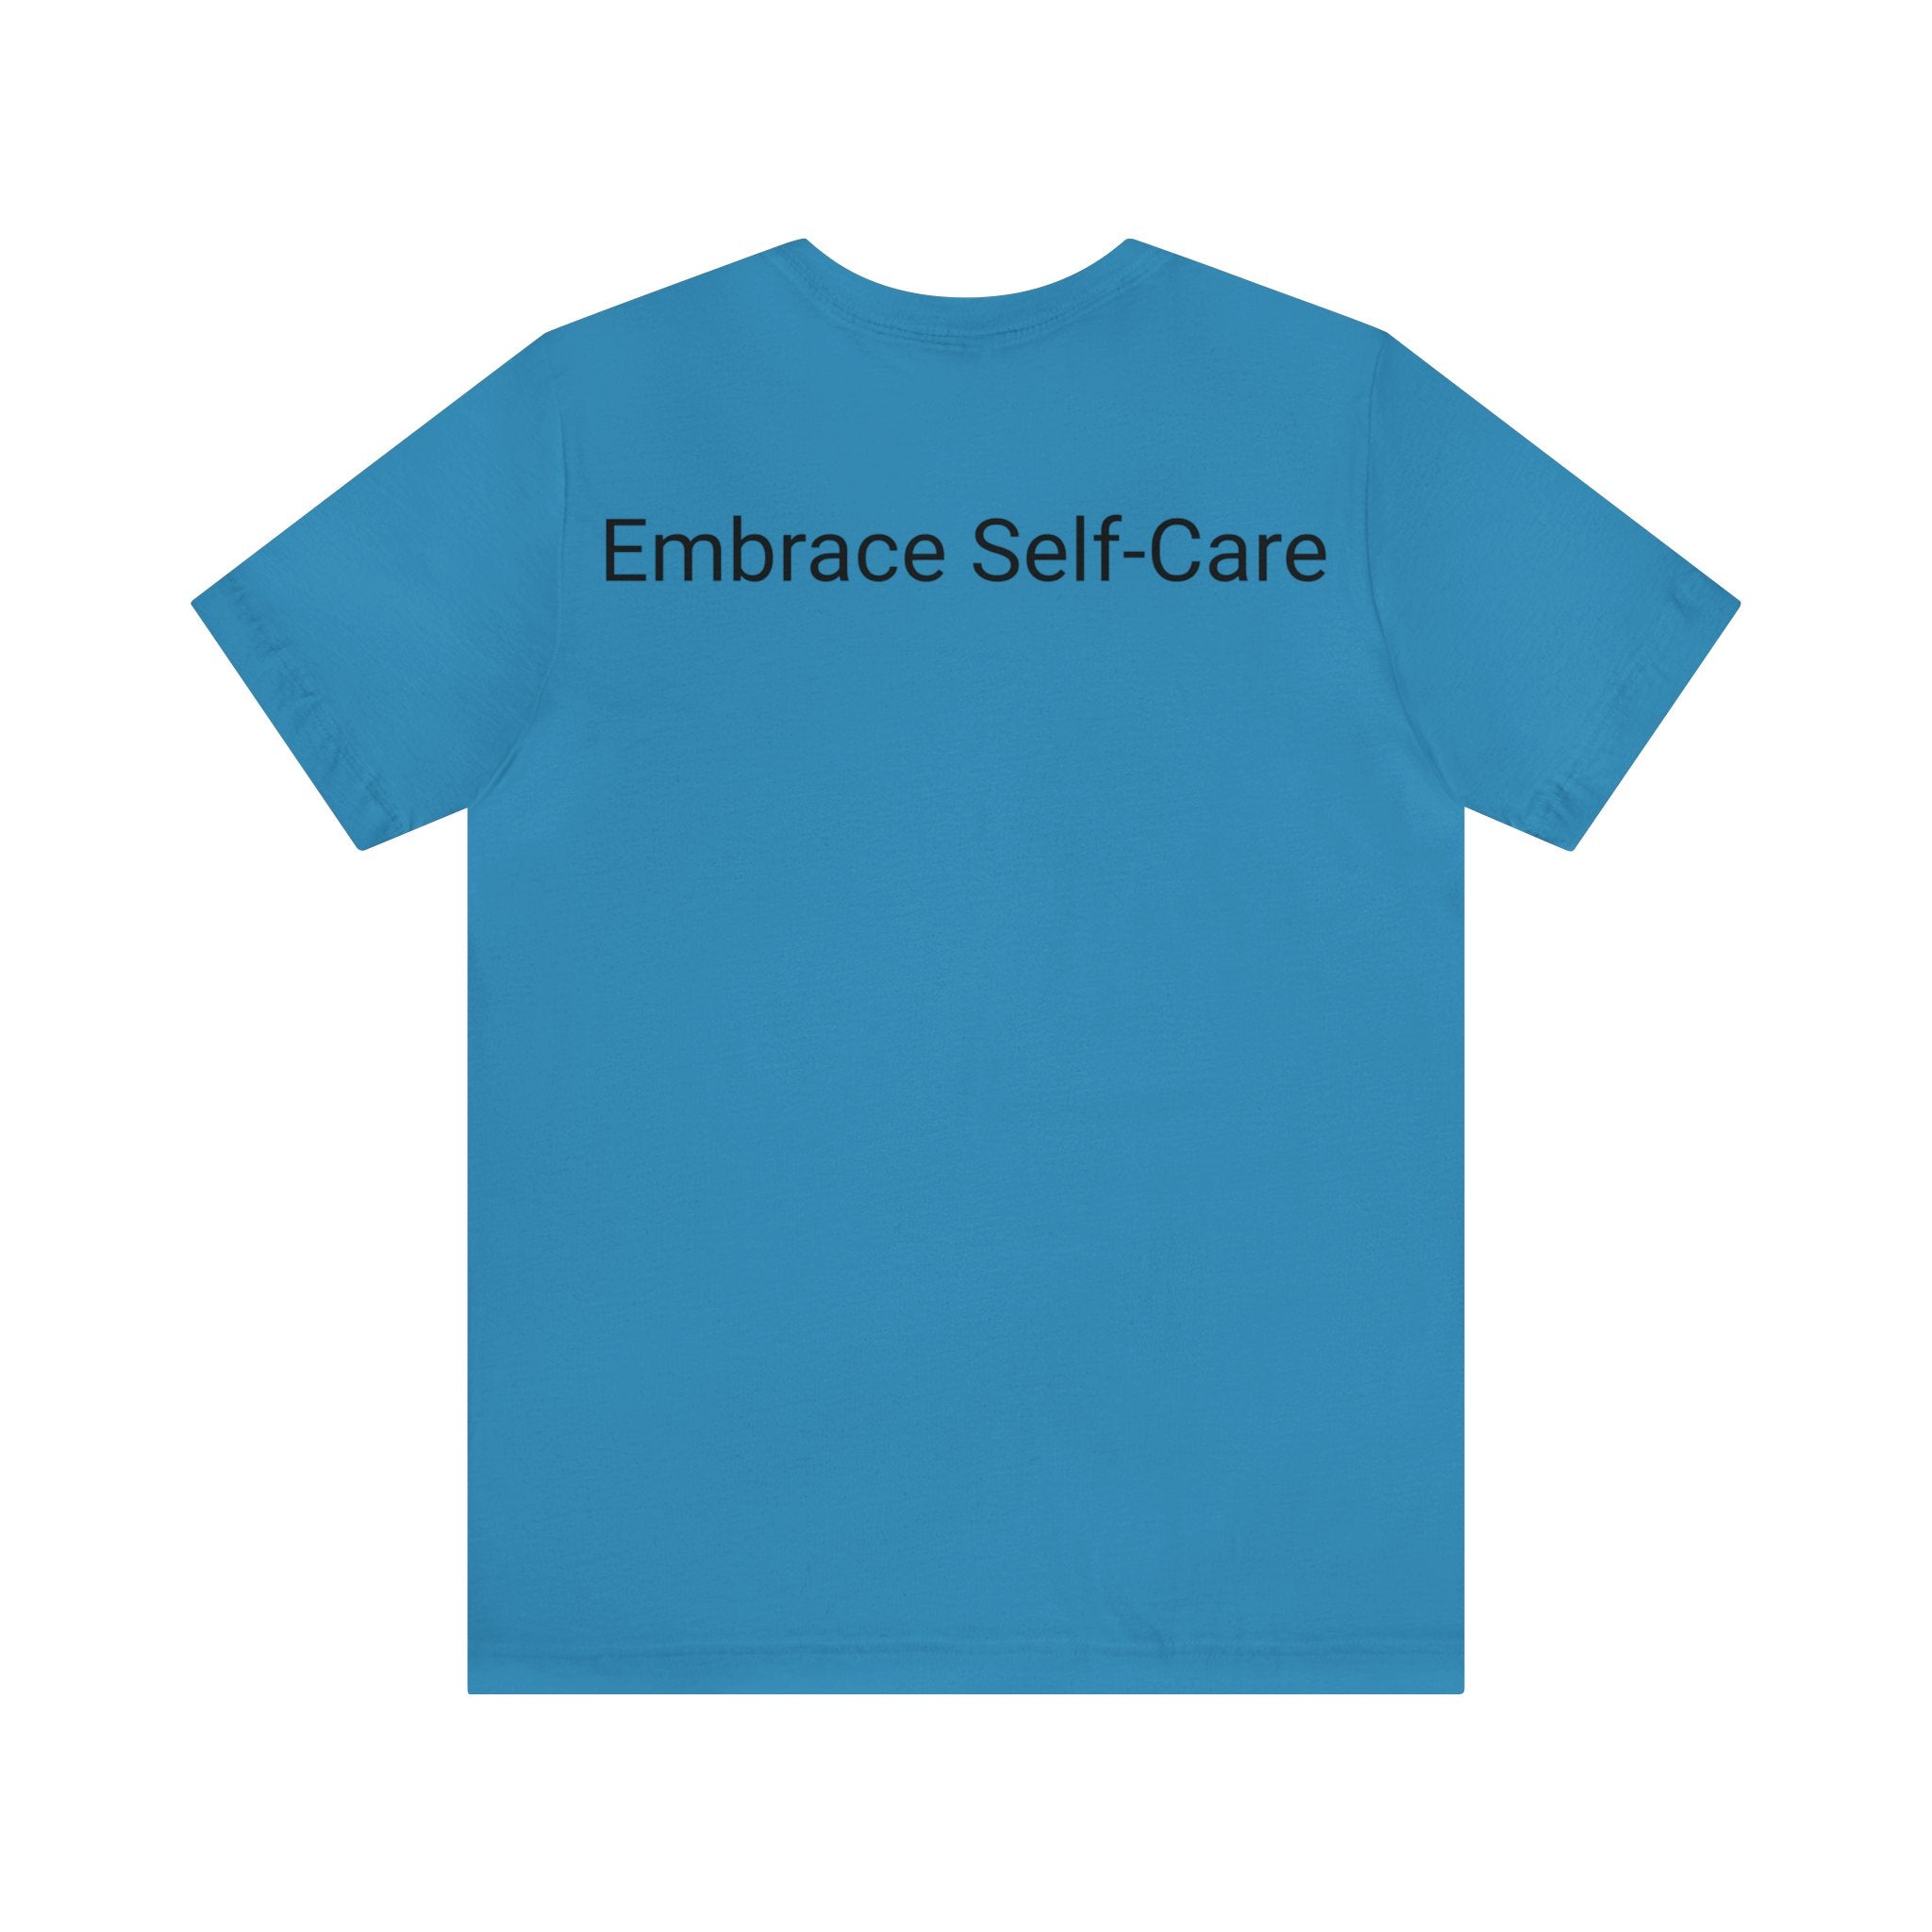 Embrace Self-Care Jersey Tee - Bella+Canvas 3001 Heather Mauve Airlume Cotton Bella+Canvas 3001 Crew Neckline Jersey Short Sleeve Lightweight Fabric Mental Health Support Retail Fit Tear-away Label Tee Unisex Tee T-Shirt 7184070433242421147_2048 Printify